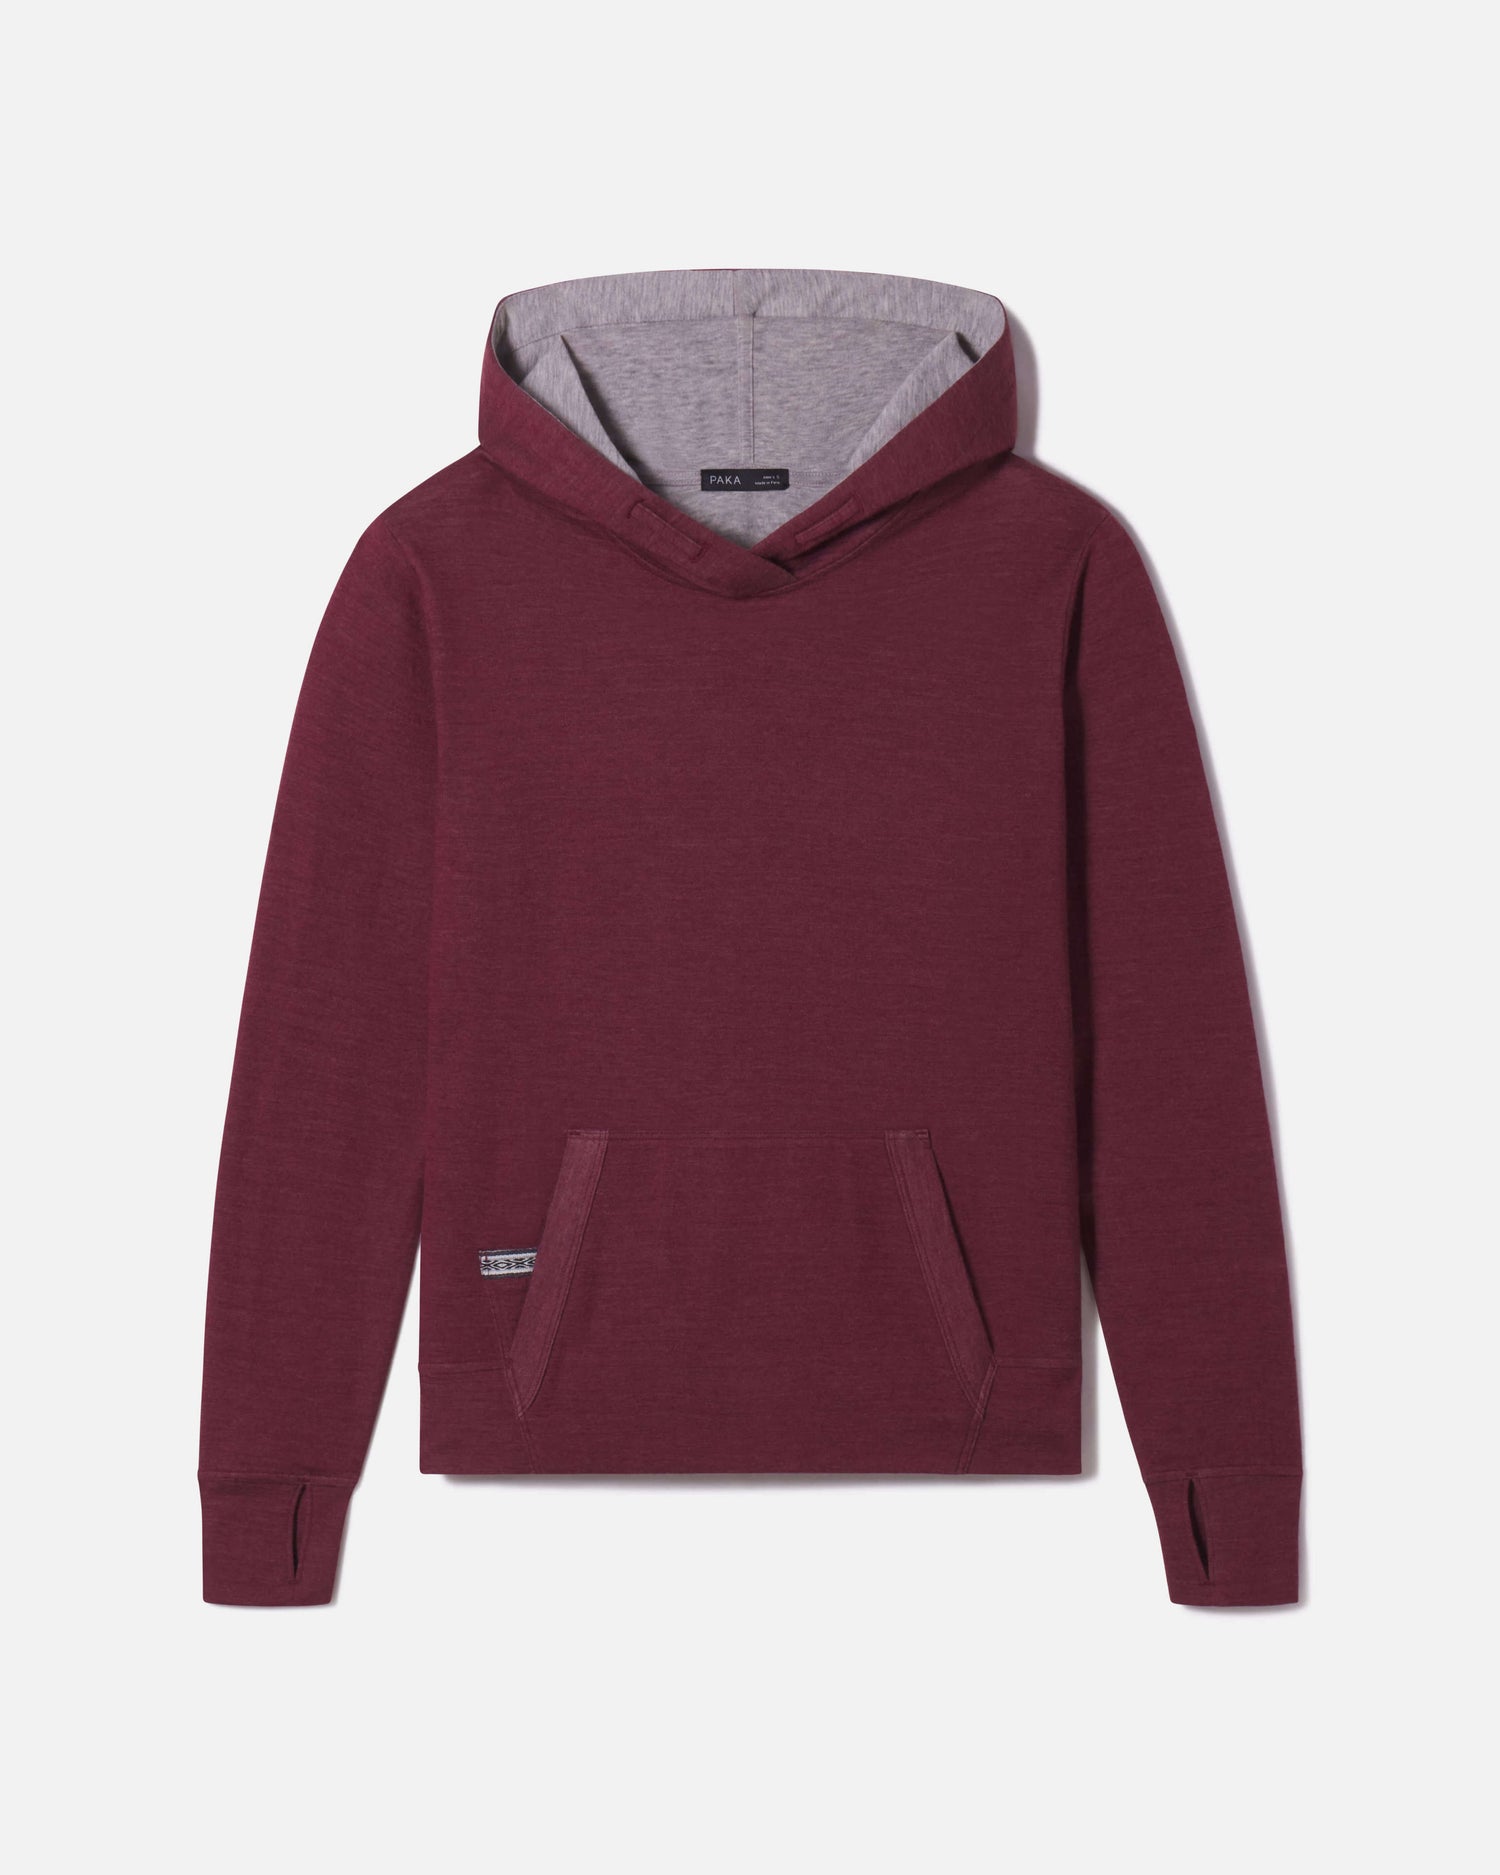 Men's Breathe red Hoodie with front pocket and grey interior